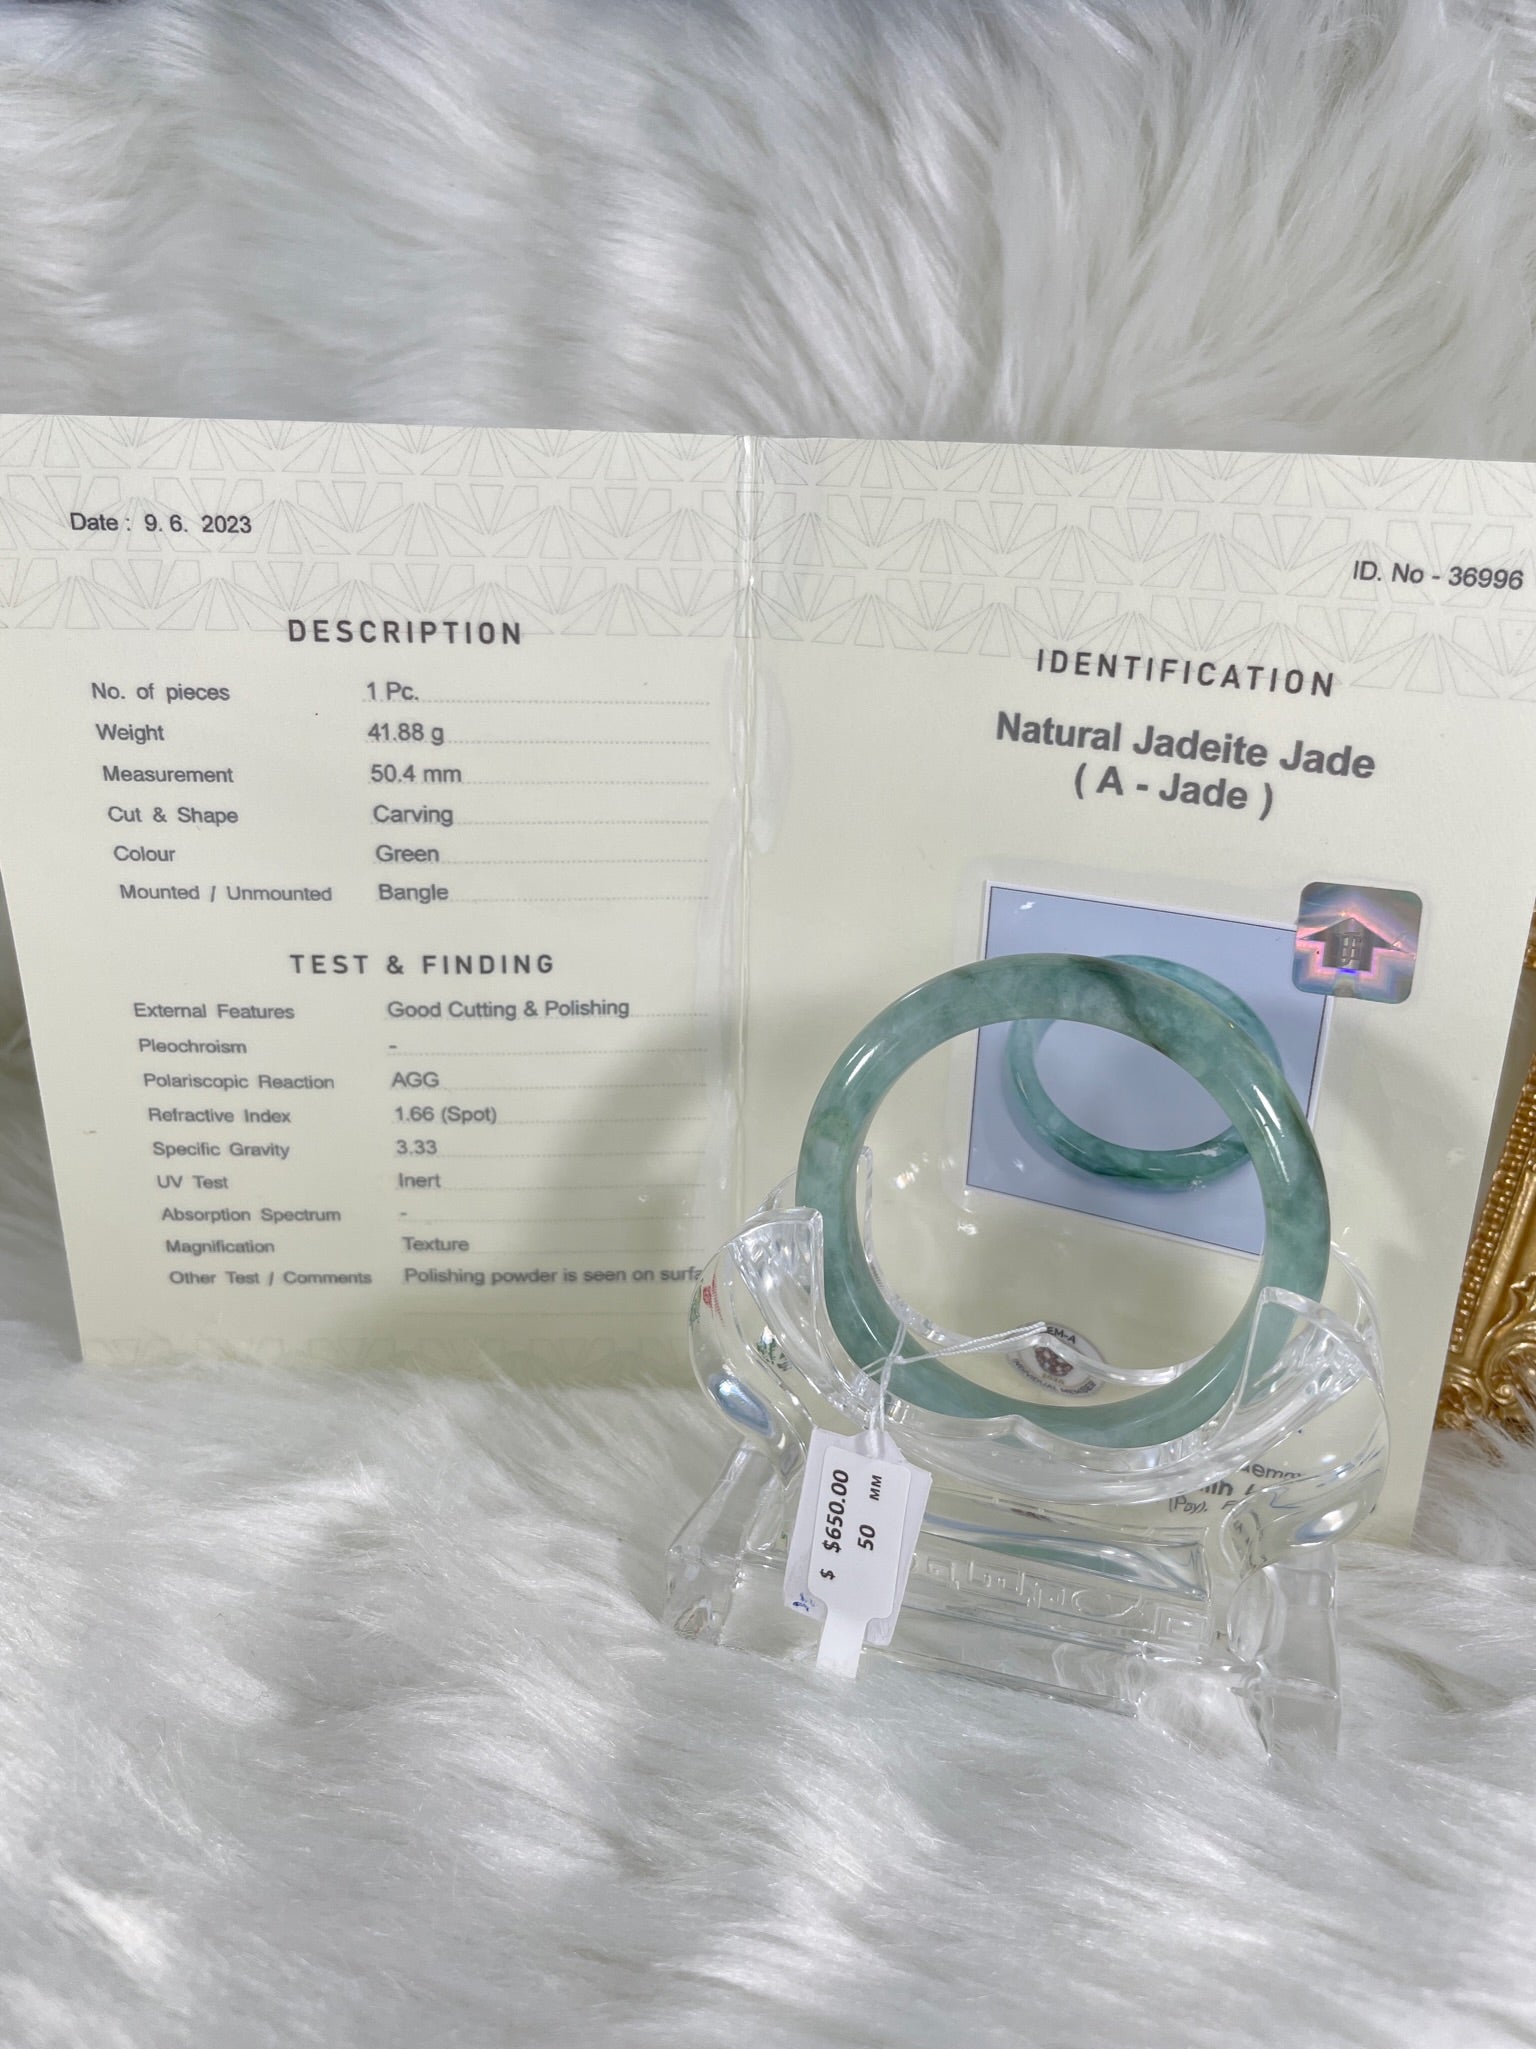 Grade A Natural Jade Bangle with certificate #36996